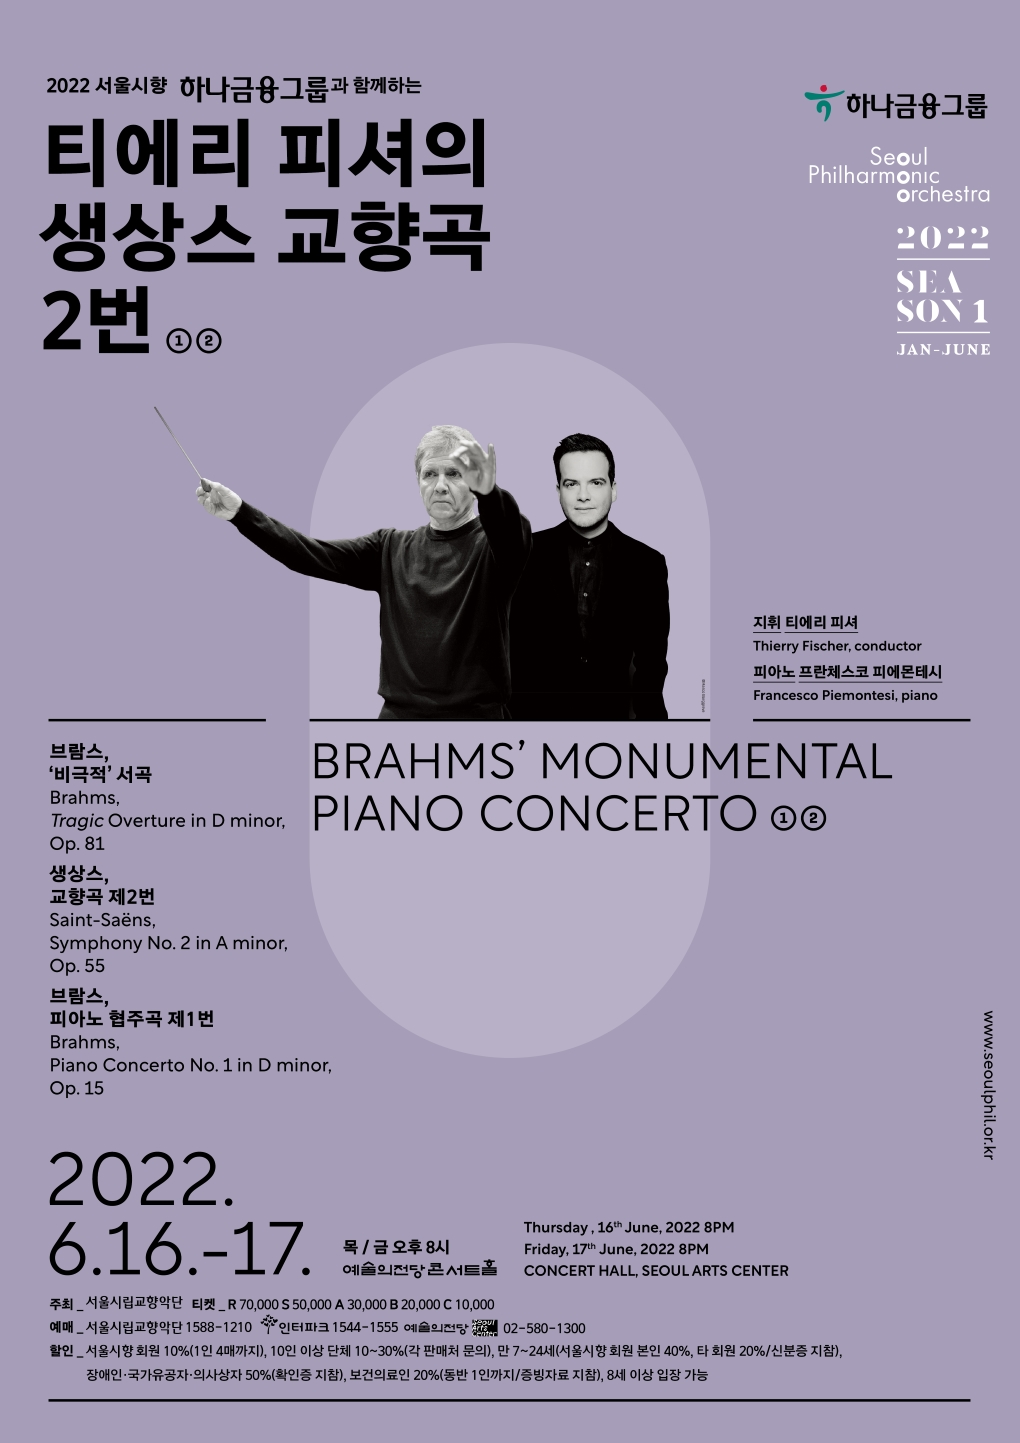 BRAHMS’ MONUMENTAL PIANO CONCERTO ② Performance Poster